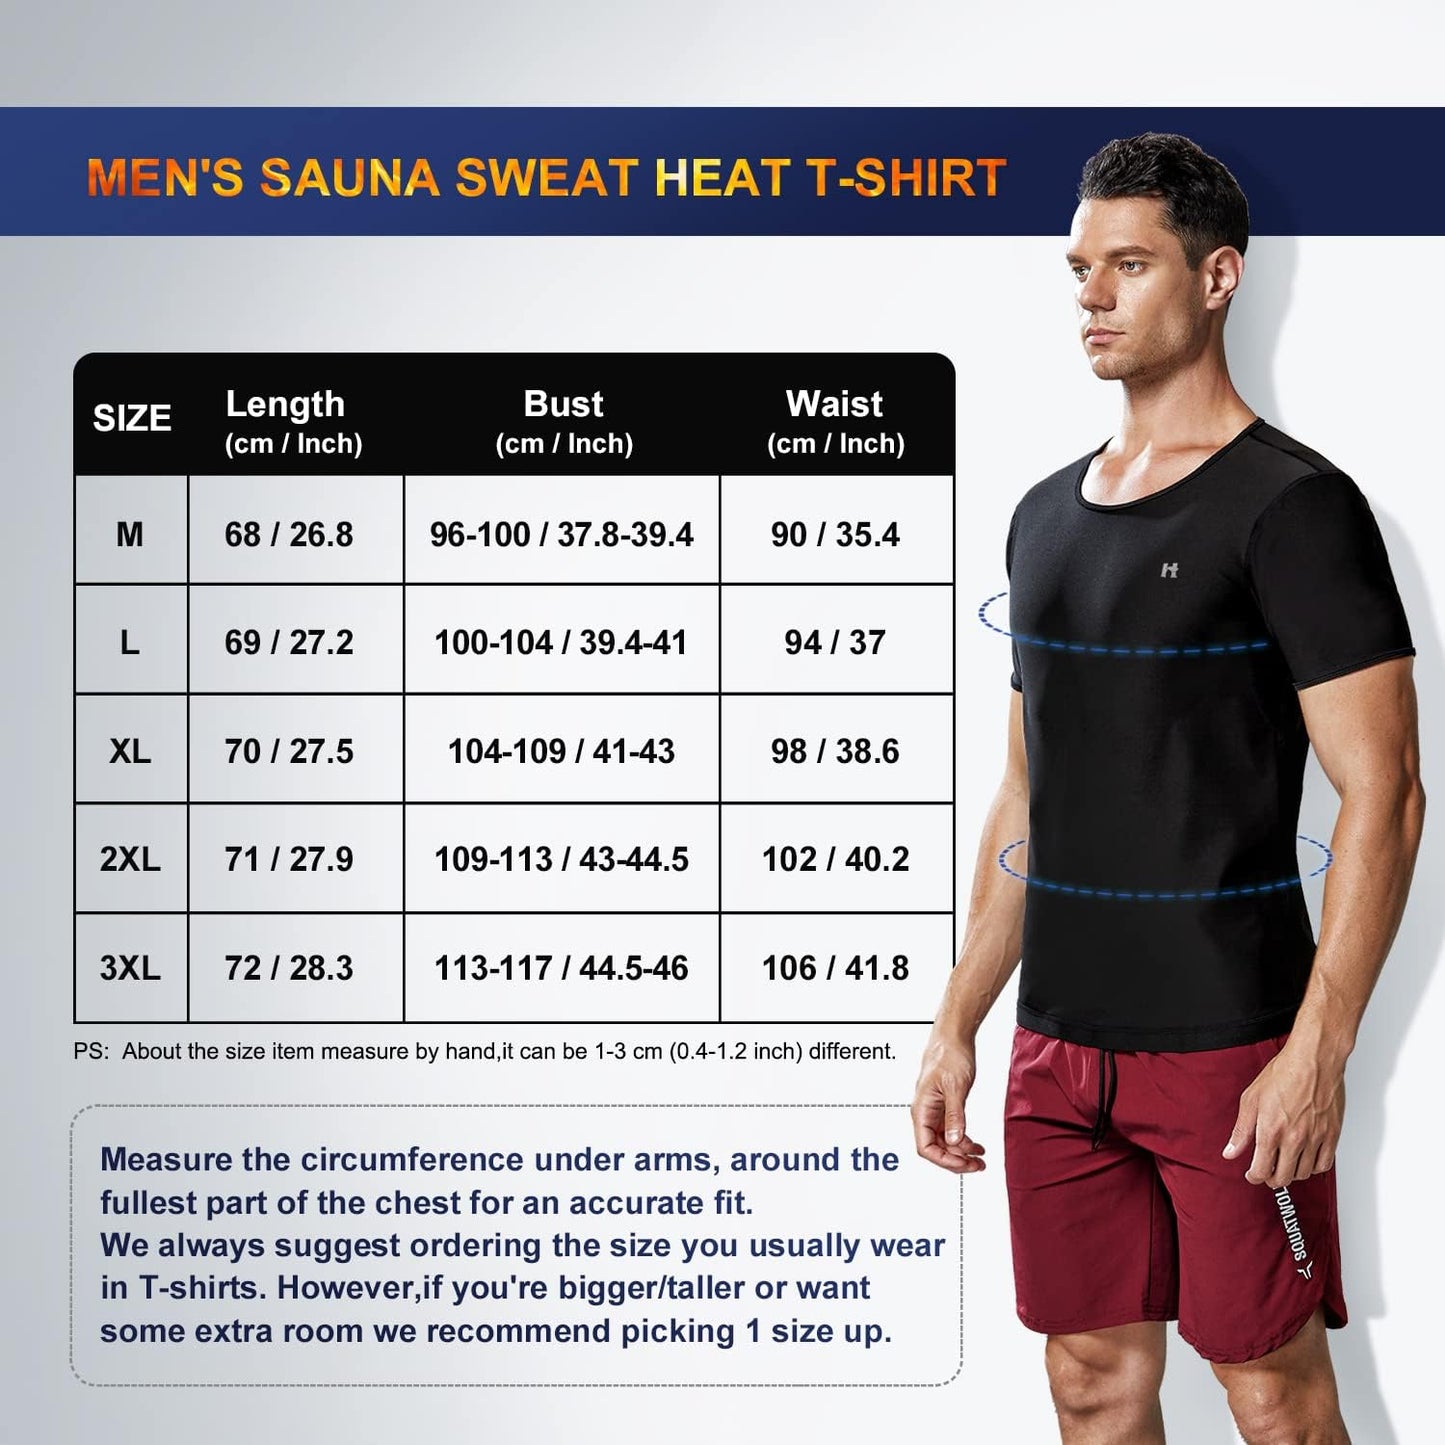 "Ultimate Men'S Sauna Sweat-Shirt: Slimming Shapewear for Compression Fitness and Body Transformation"